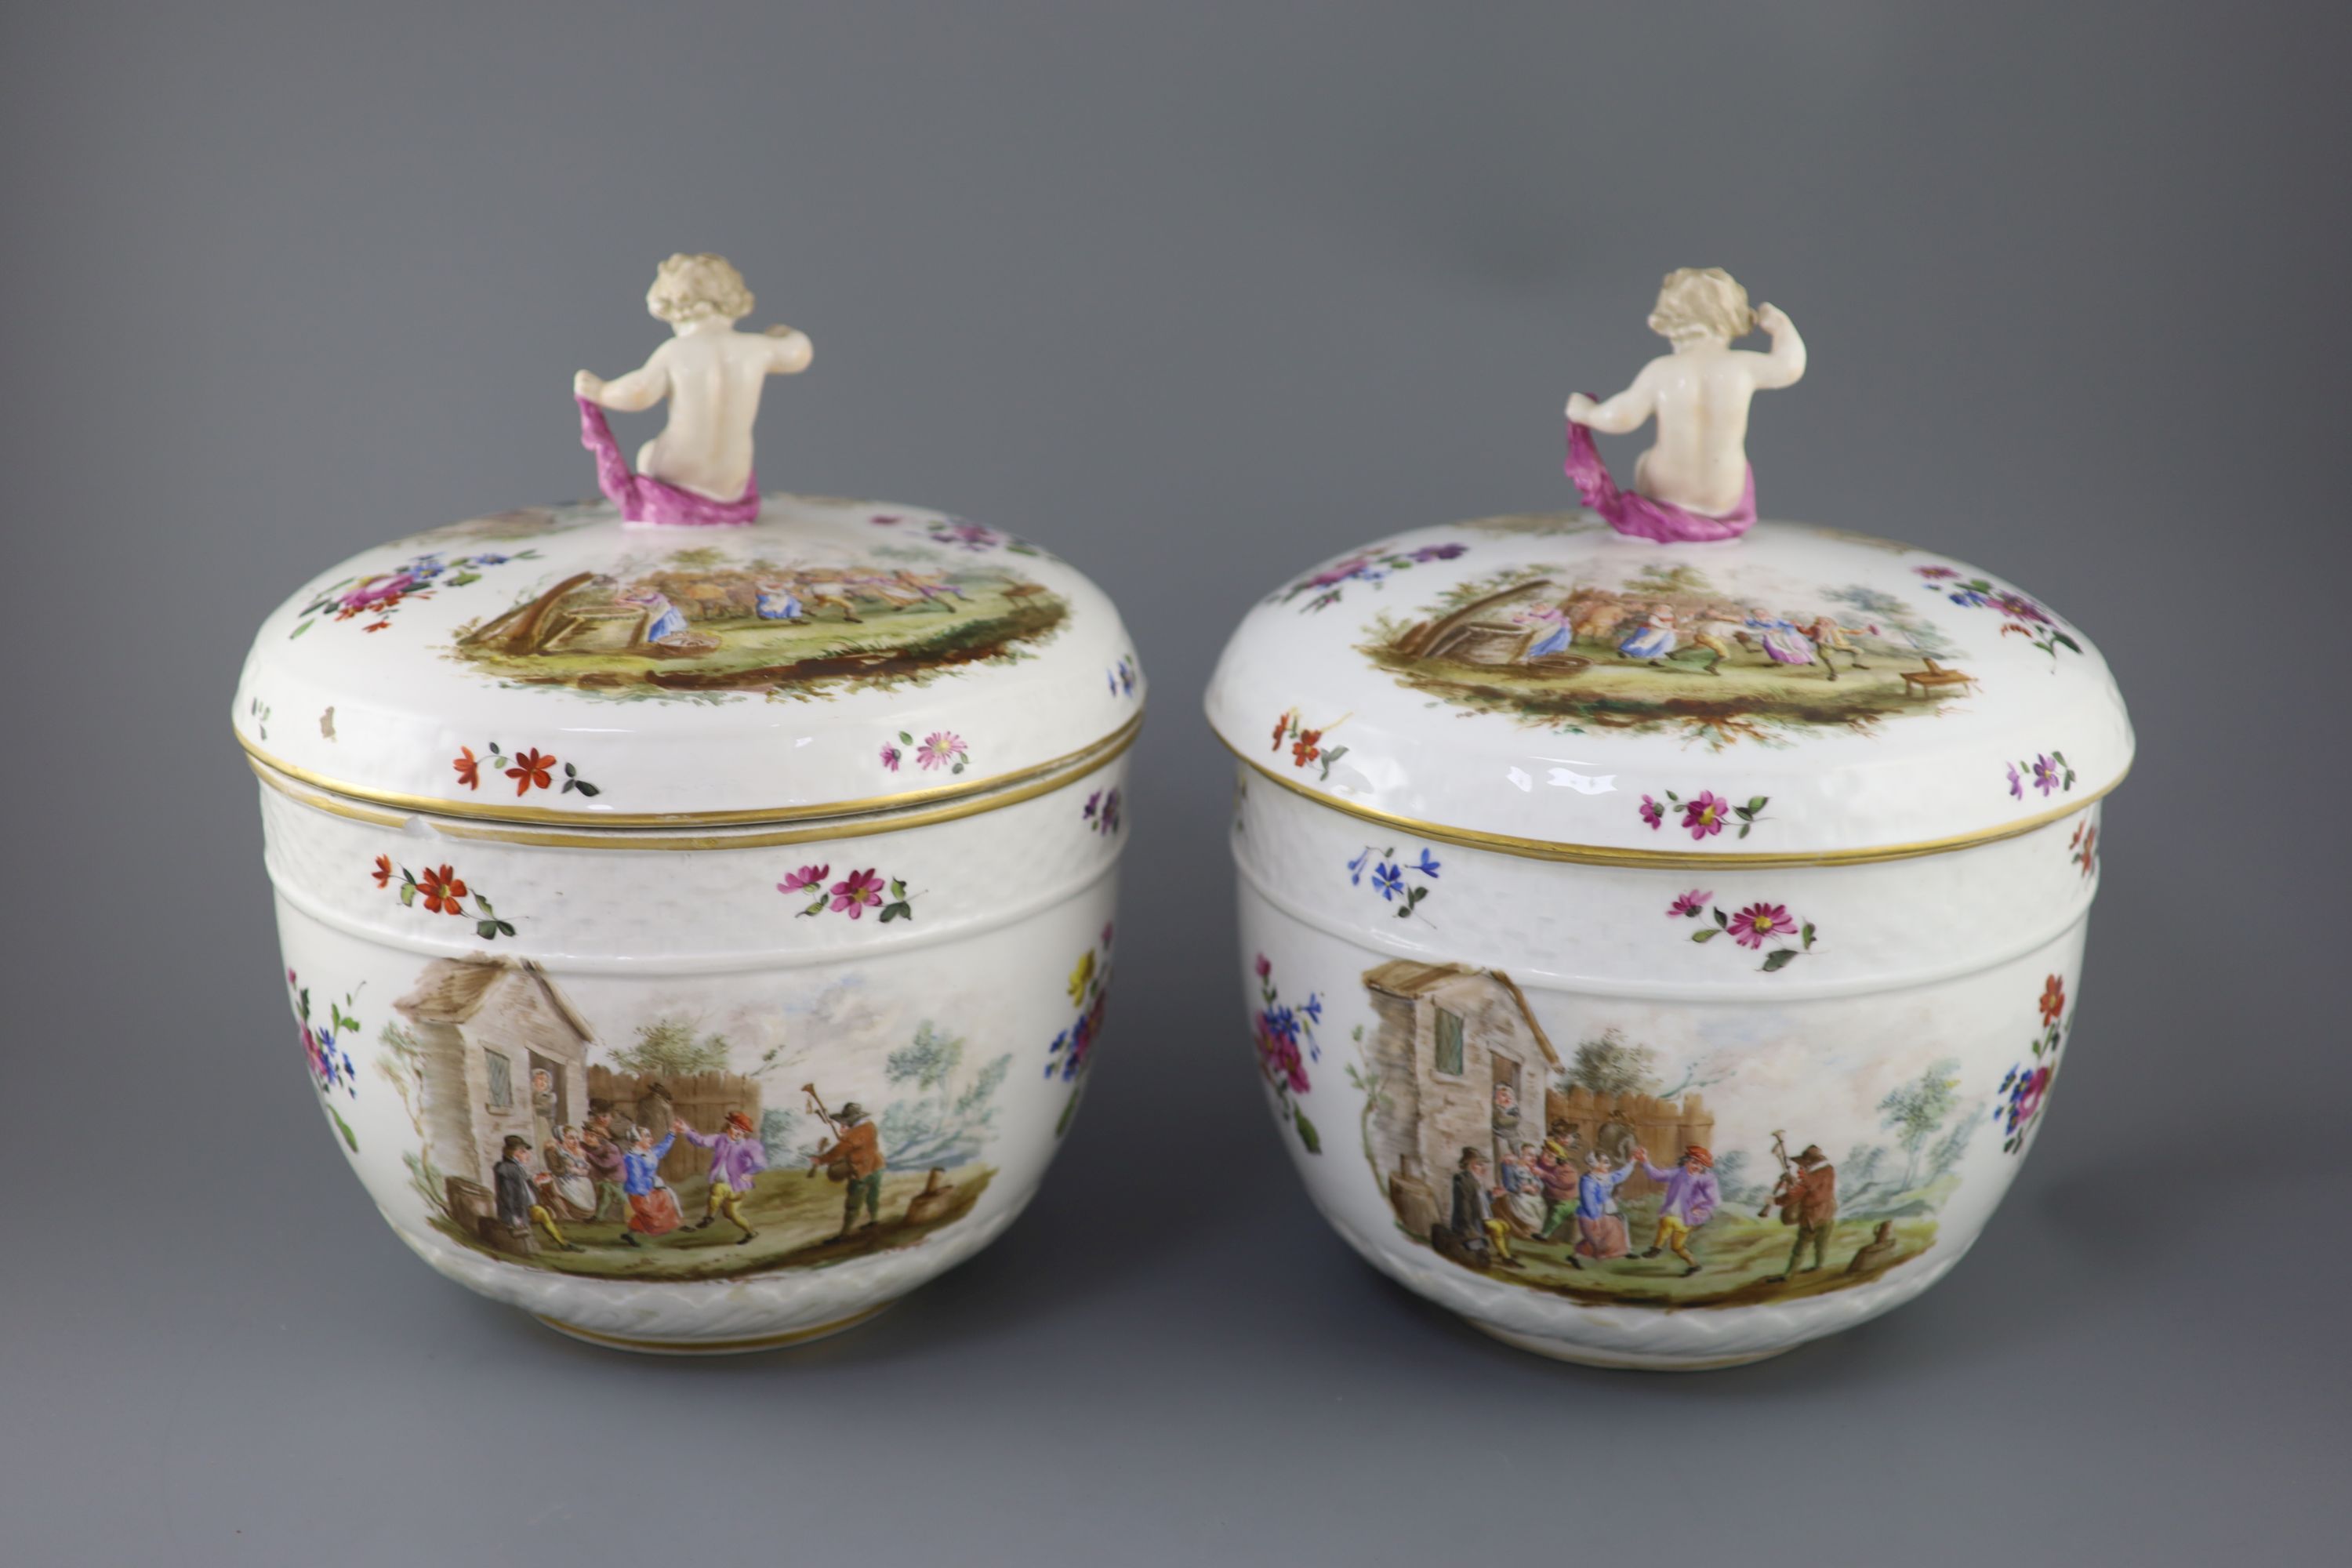 A pair of large Meissen style porcelain bowls and covers, late 19th century, possibly Potschappel, 34cm high 29cm diameter